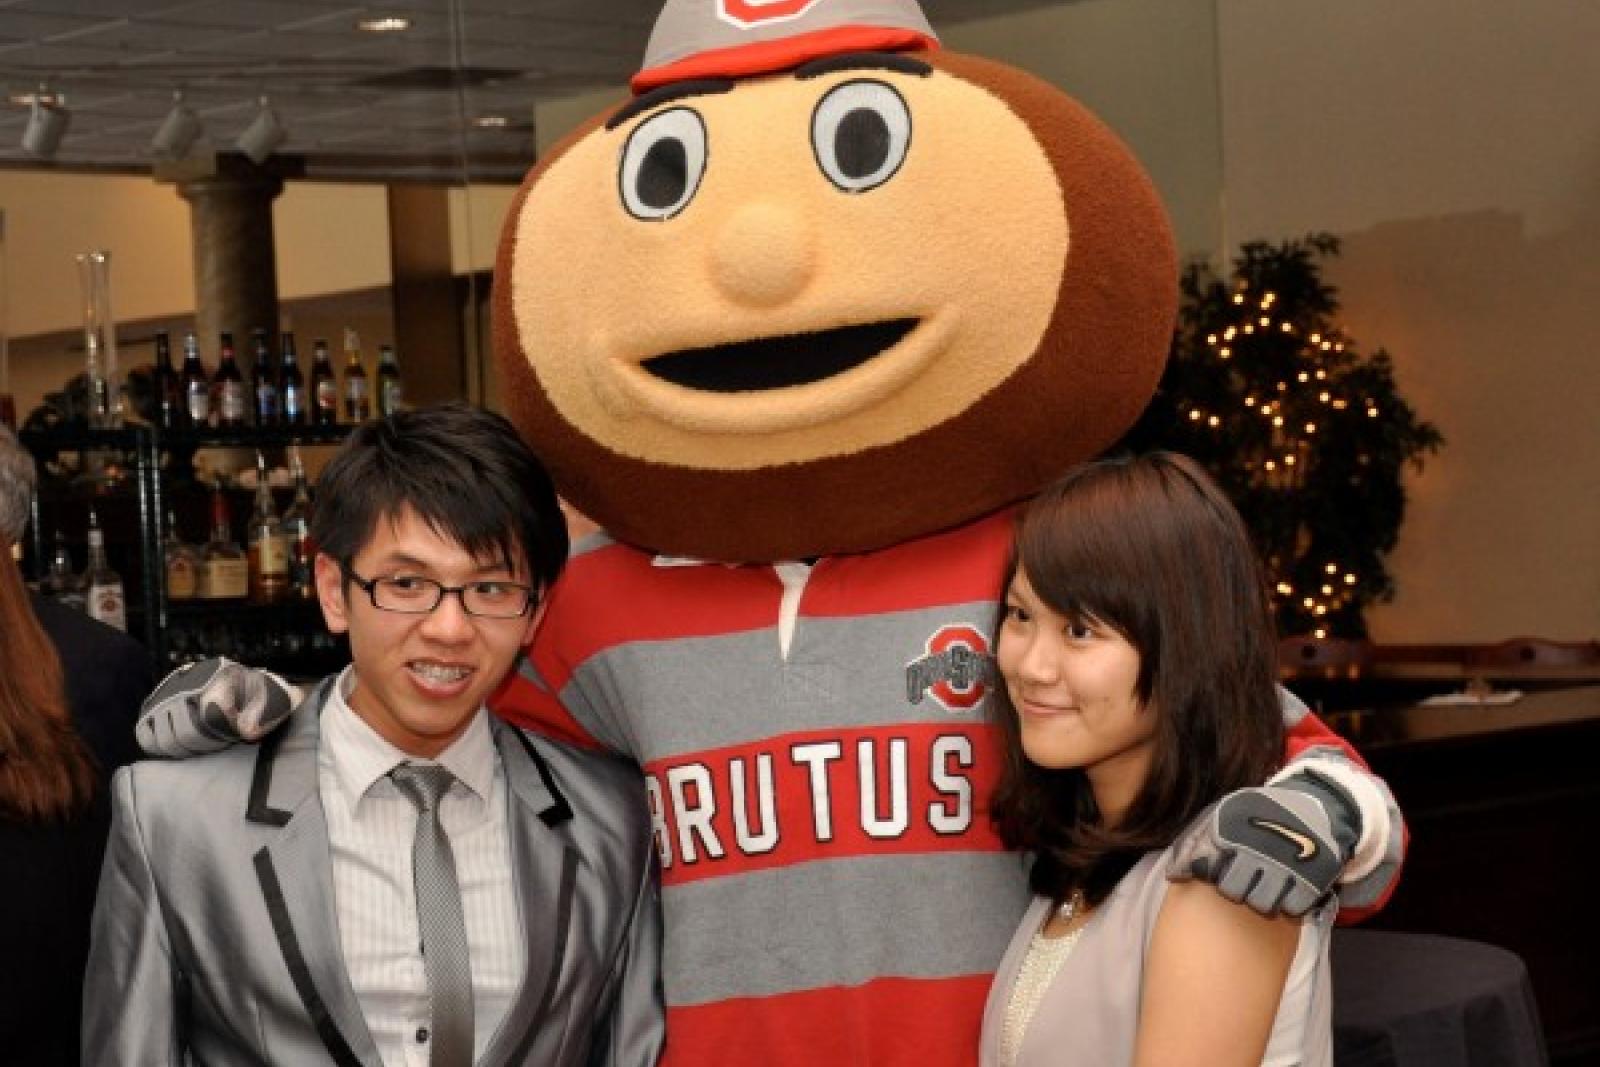 Students meeting with Brutus